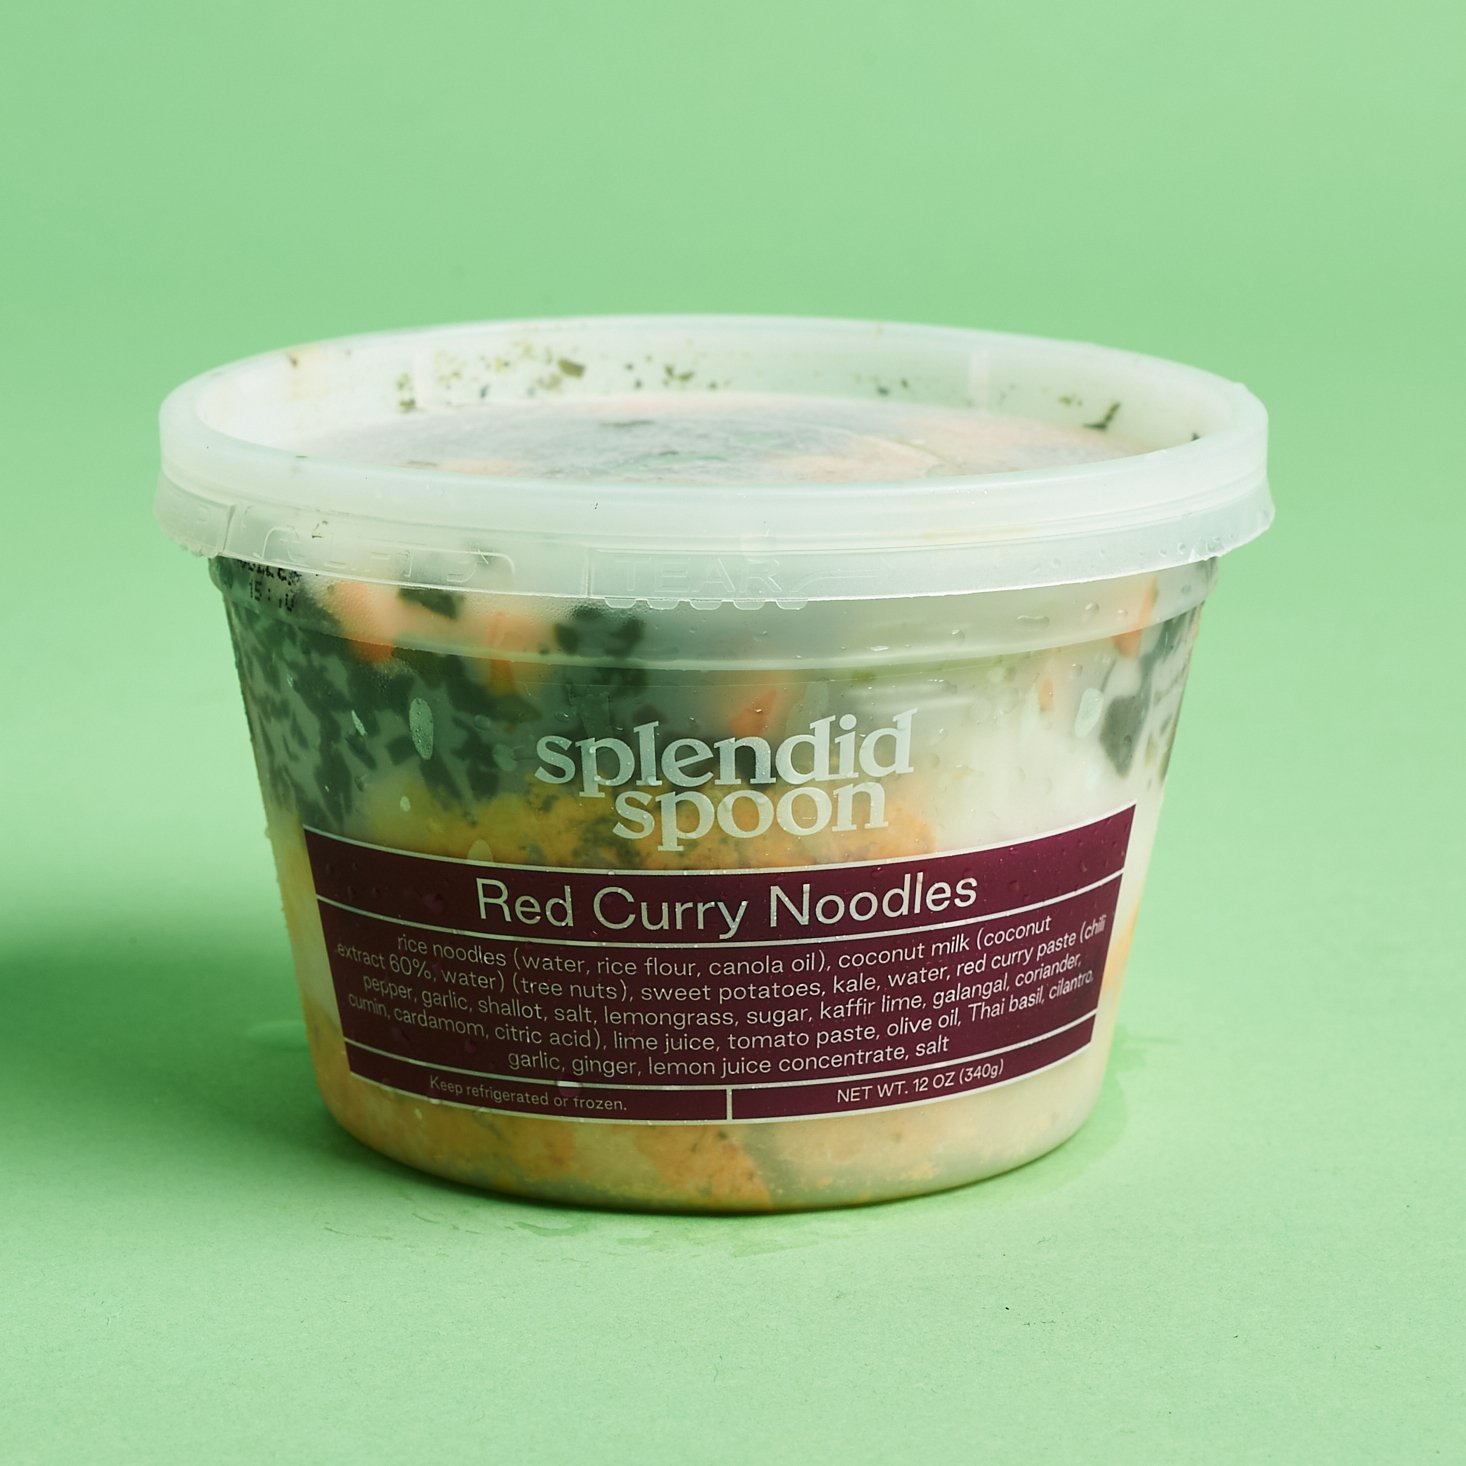 Splendid Spoon August 2020 red curry noodles